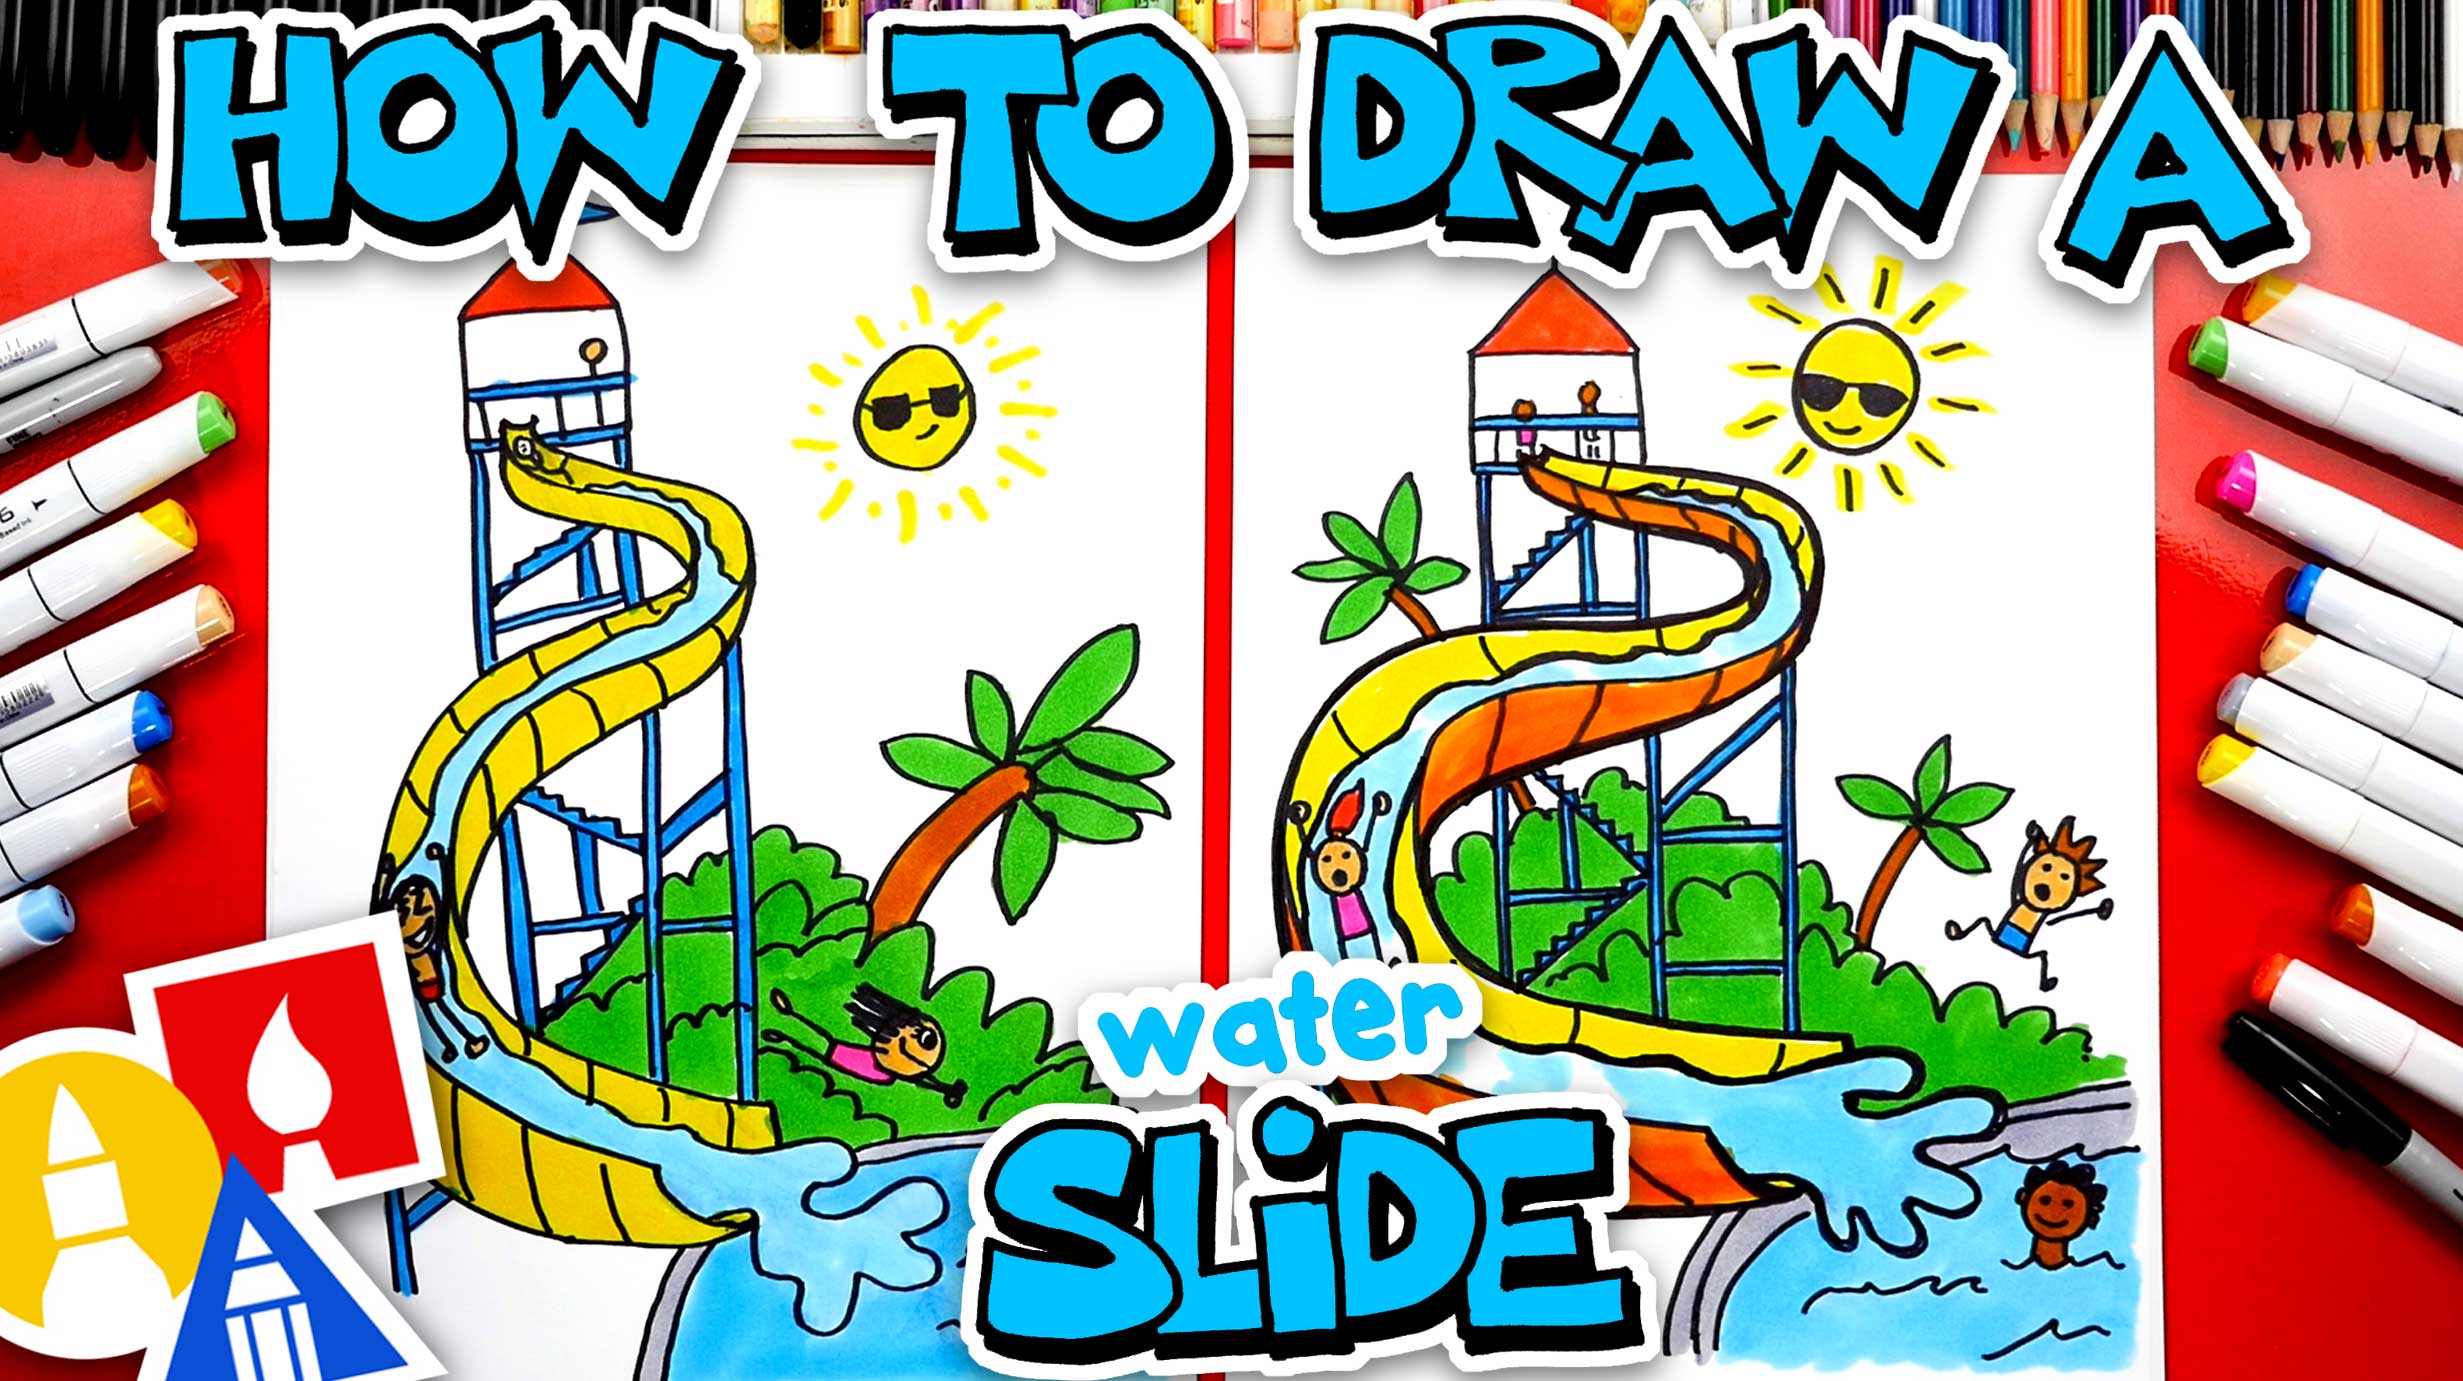 How To Draw A Waterslide Art For Kids Hub